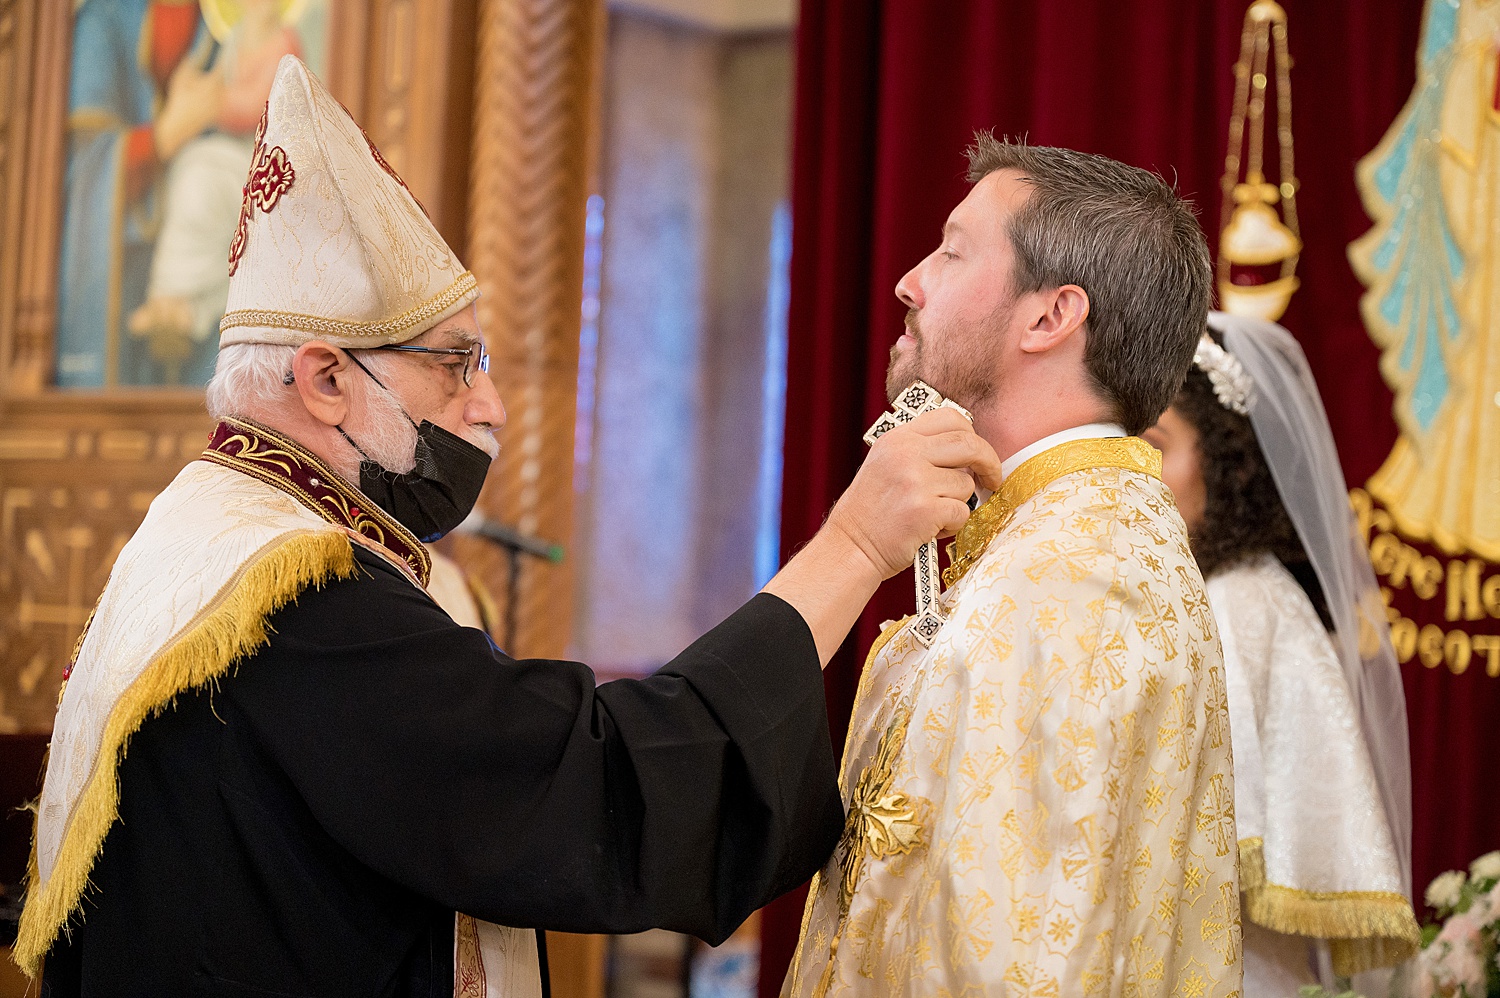 Groom getting anointment oil during Coptic Orthodox Wedding Ceremony • Coptic Orthodox Ceremony: How to Photograph a Wedding at St Mary's Church in Ambridge Pittsburgh